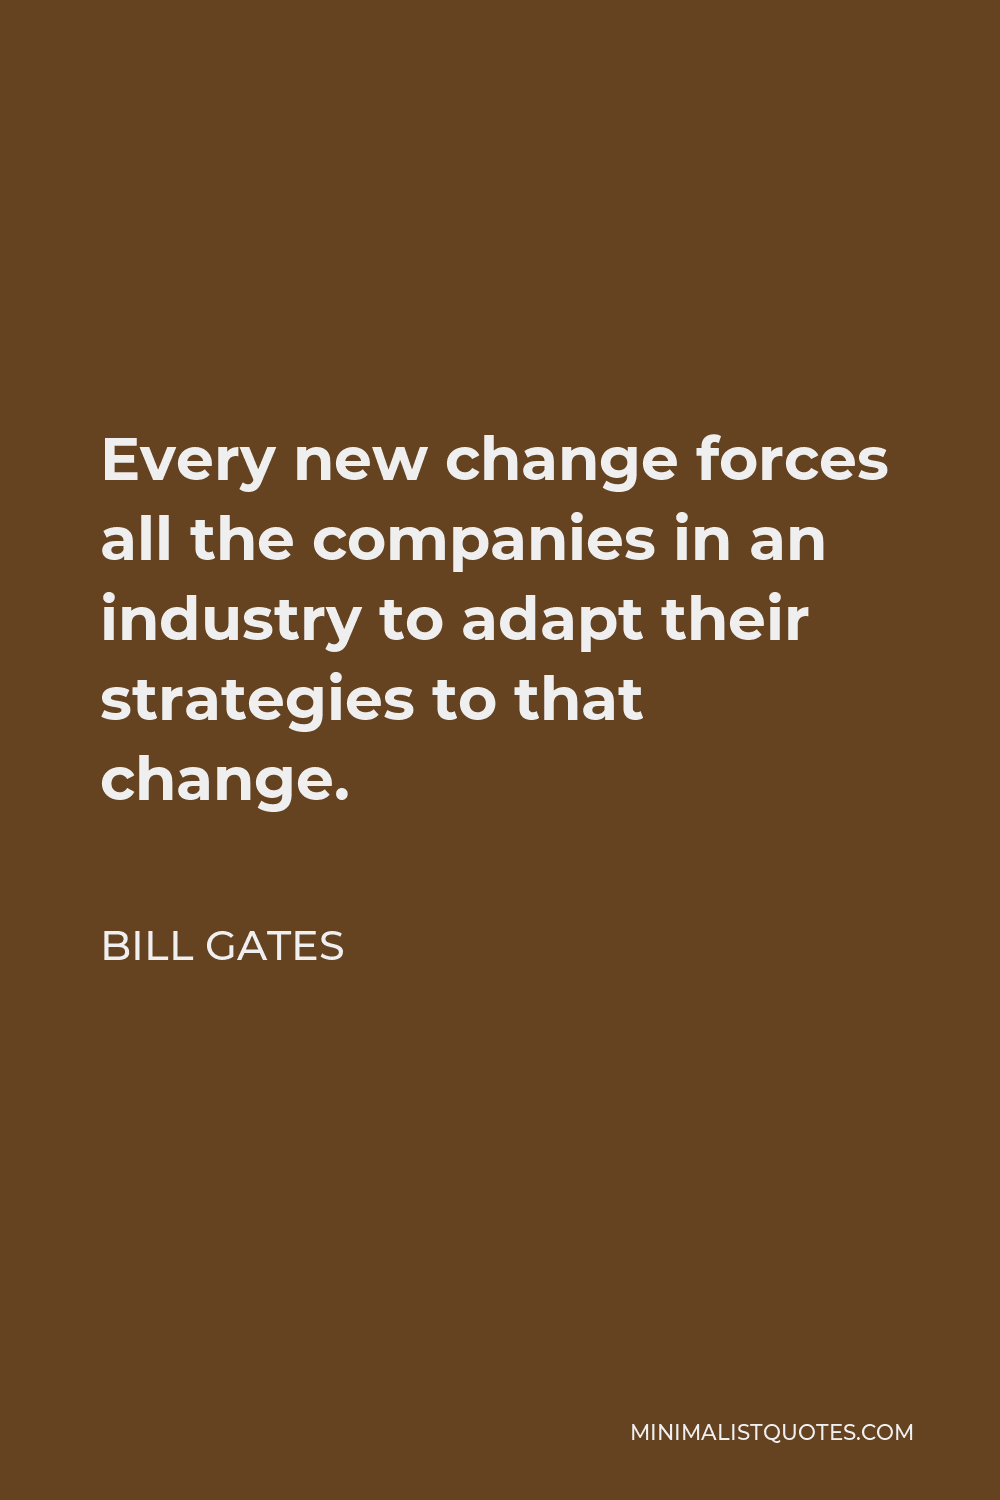 Bill Gates Quote - Every new change forces all the companies in an industry to adapt their strategies to that change.